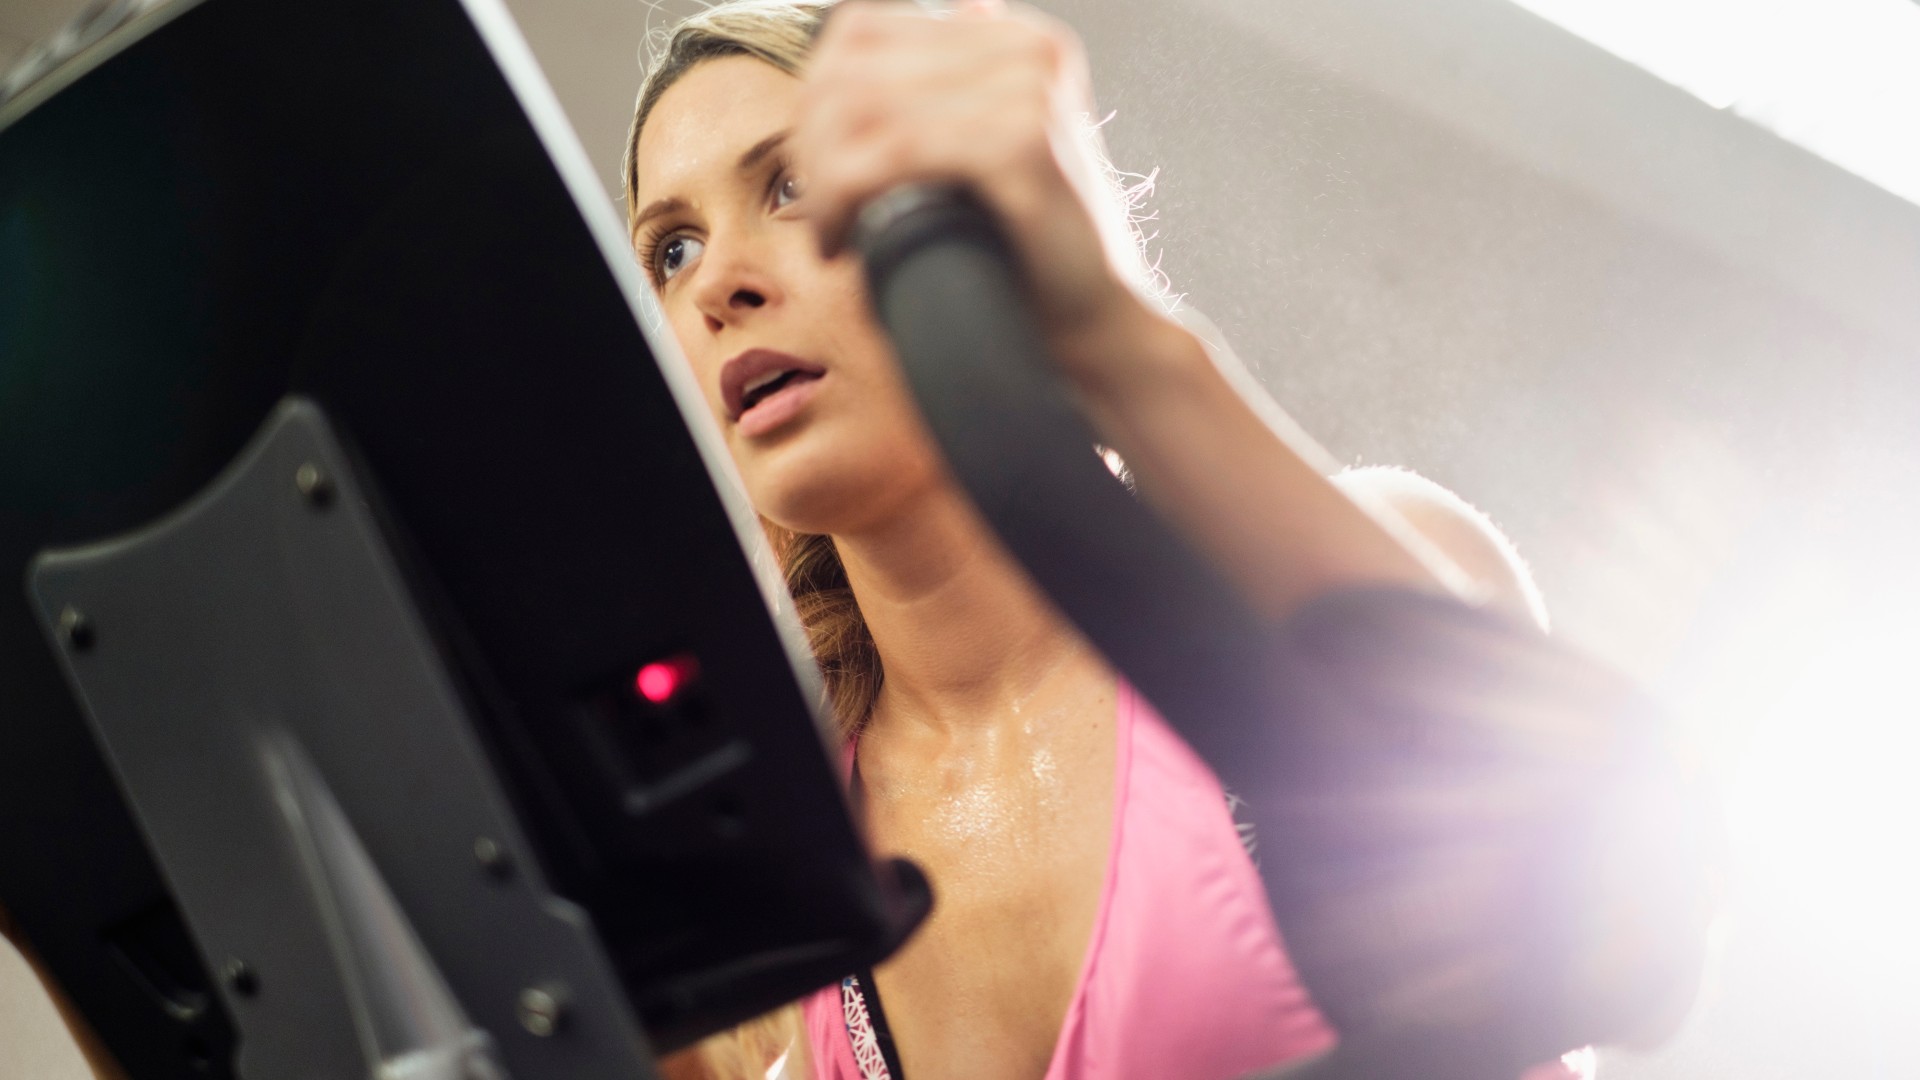 How to work out on an elliptical: The best tips and tricks - CNET